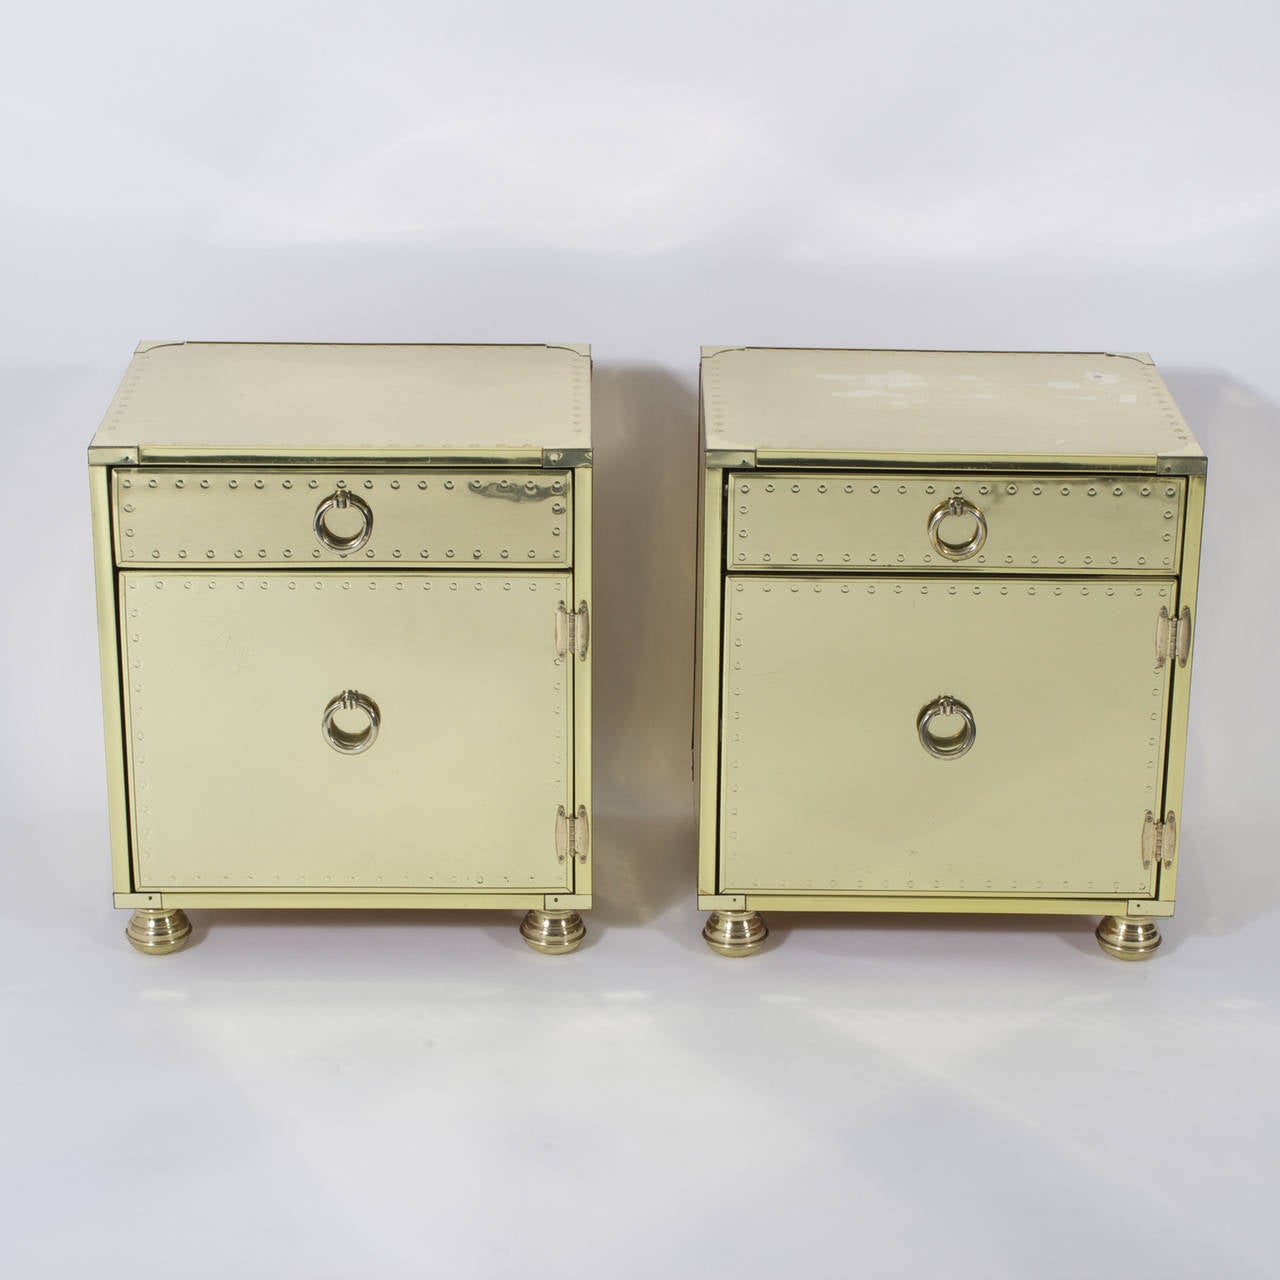 Pair of Mid-Century brass-plated nightstands or end tables, one drawer and door, with ring pulls, designed in a Campaign style and entirely clad in metal. Featuring faux rivet trim, turned brass feet and lots of storage, these stands coin a new